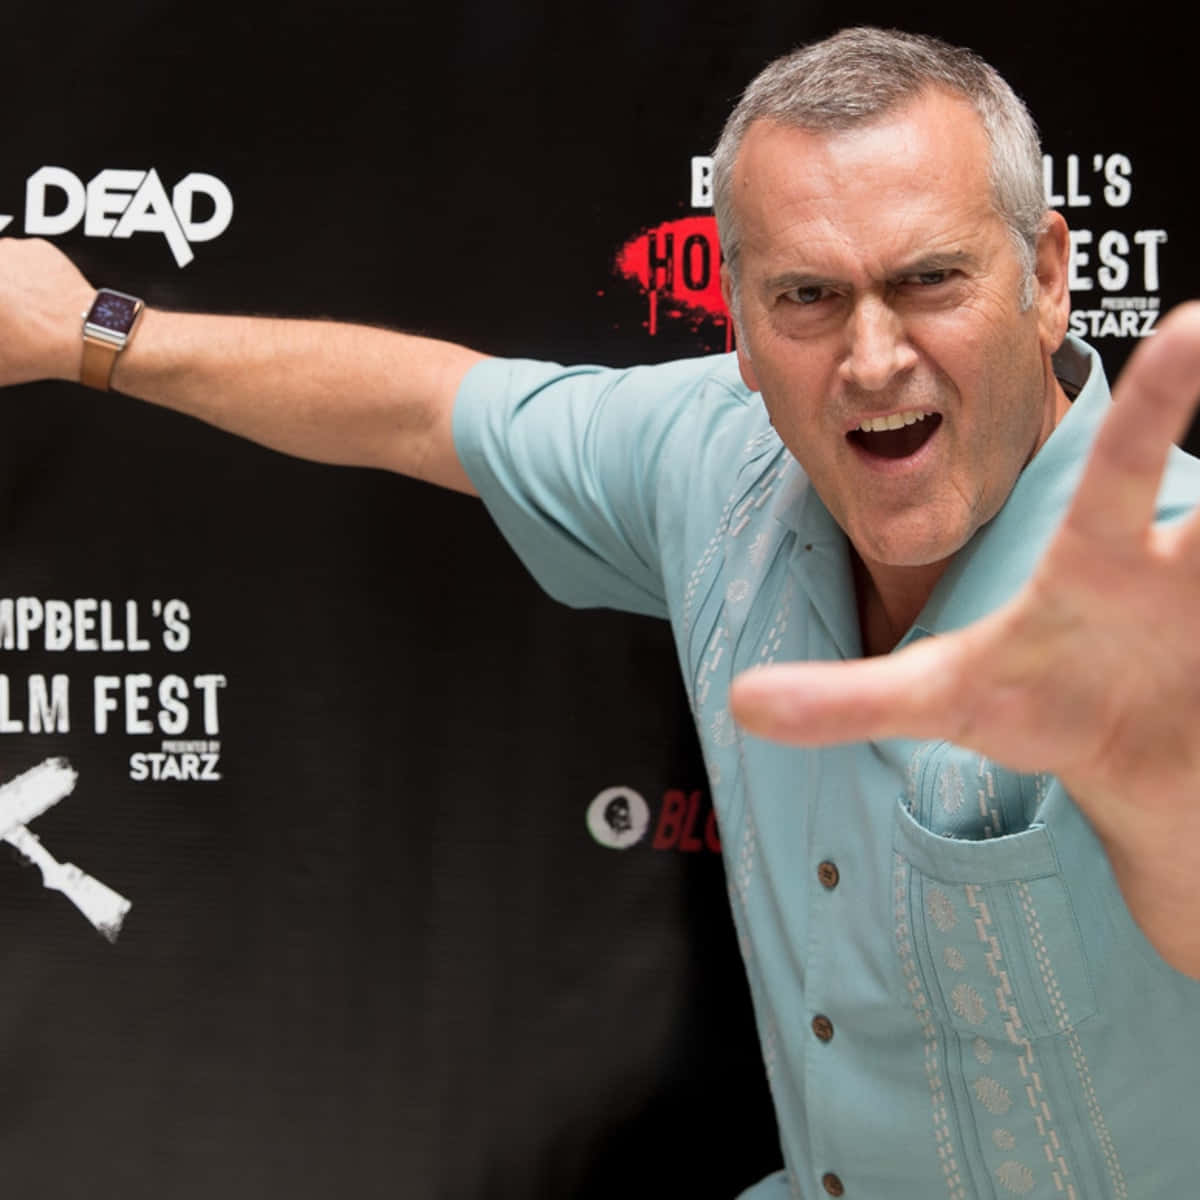 Bruce Campbell in Character - A Master of Horror Comedy Wallpaper